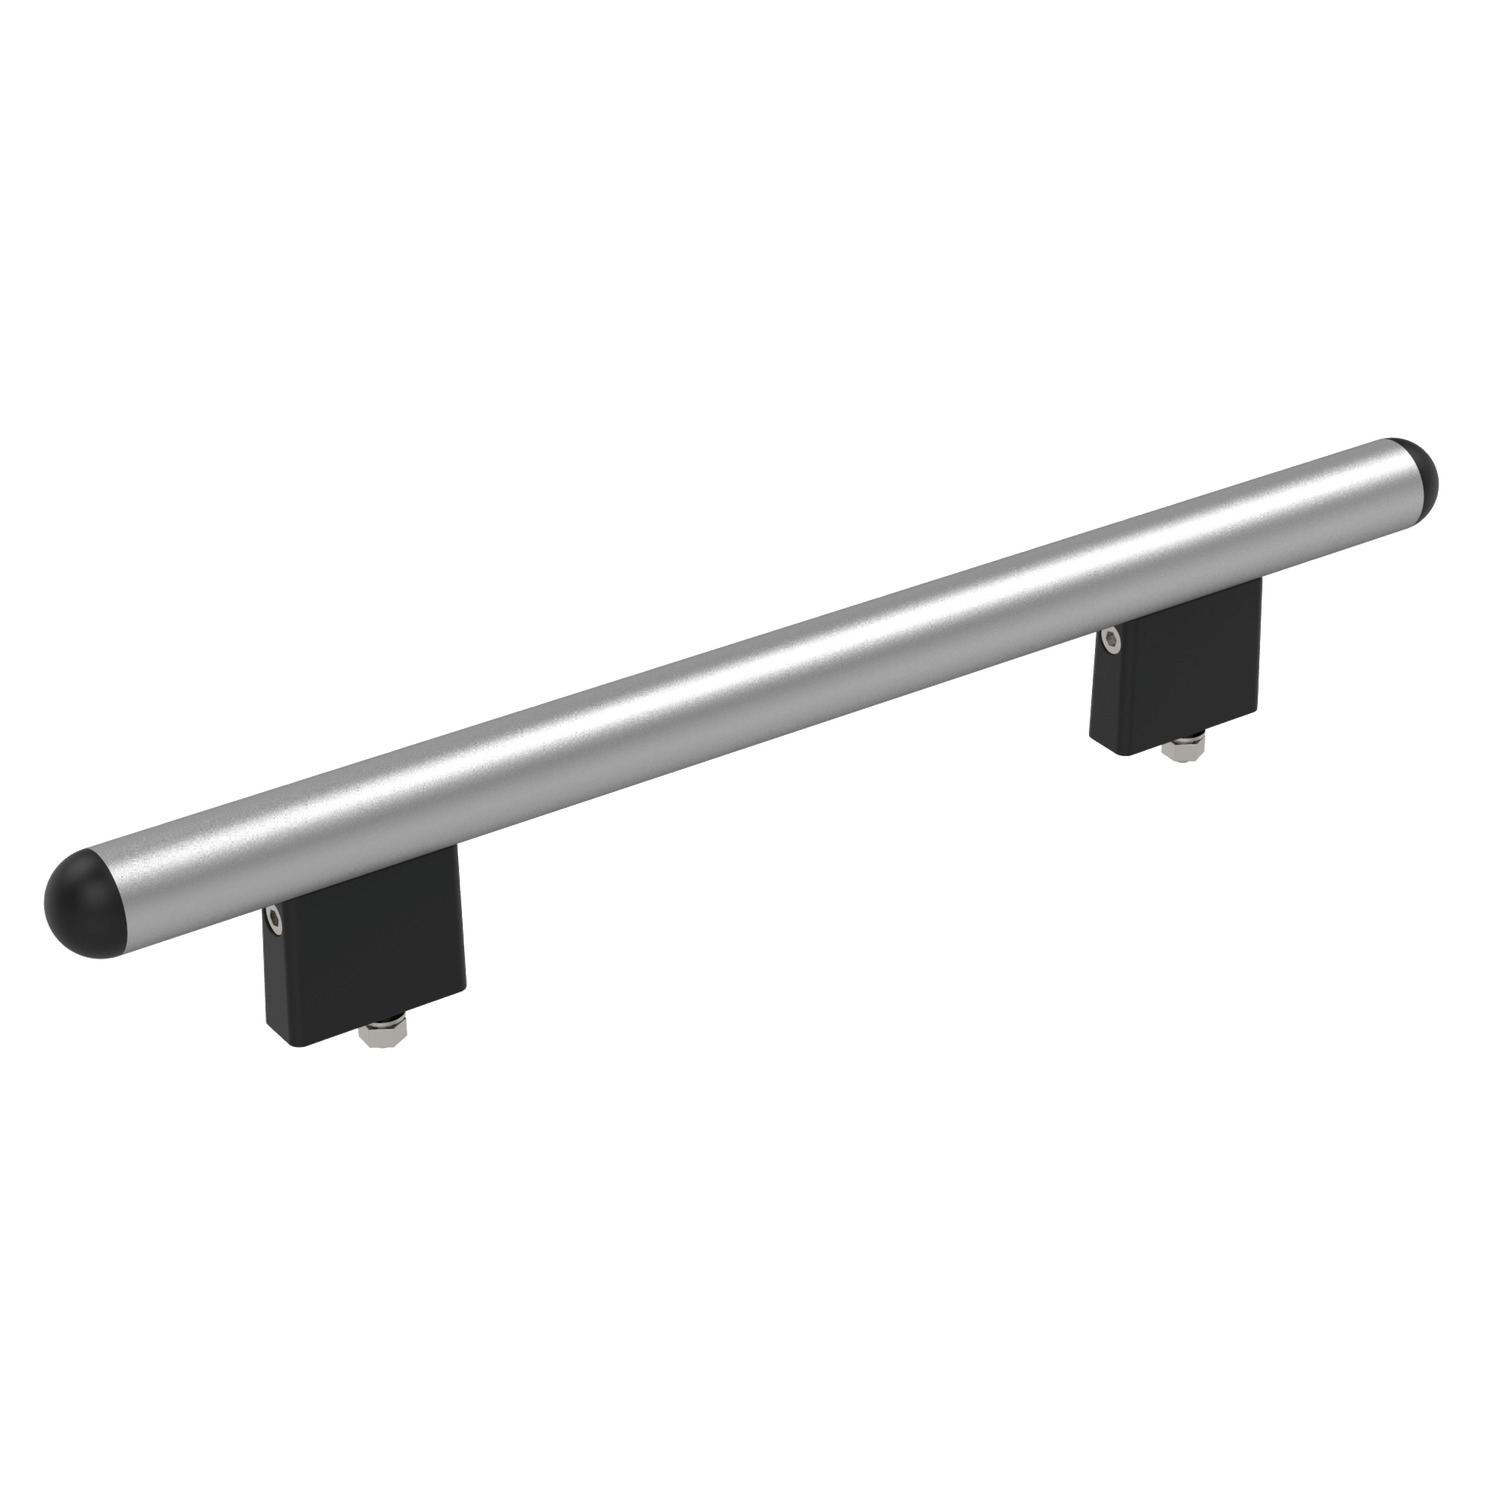 Product 79410, Pull Handles - Heavy Duty stainless steel and aluminium / 